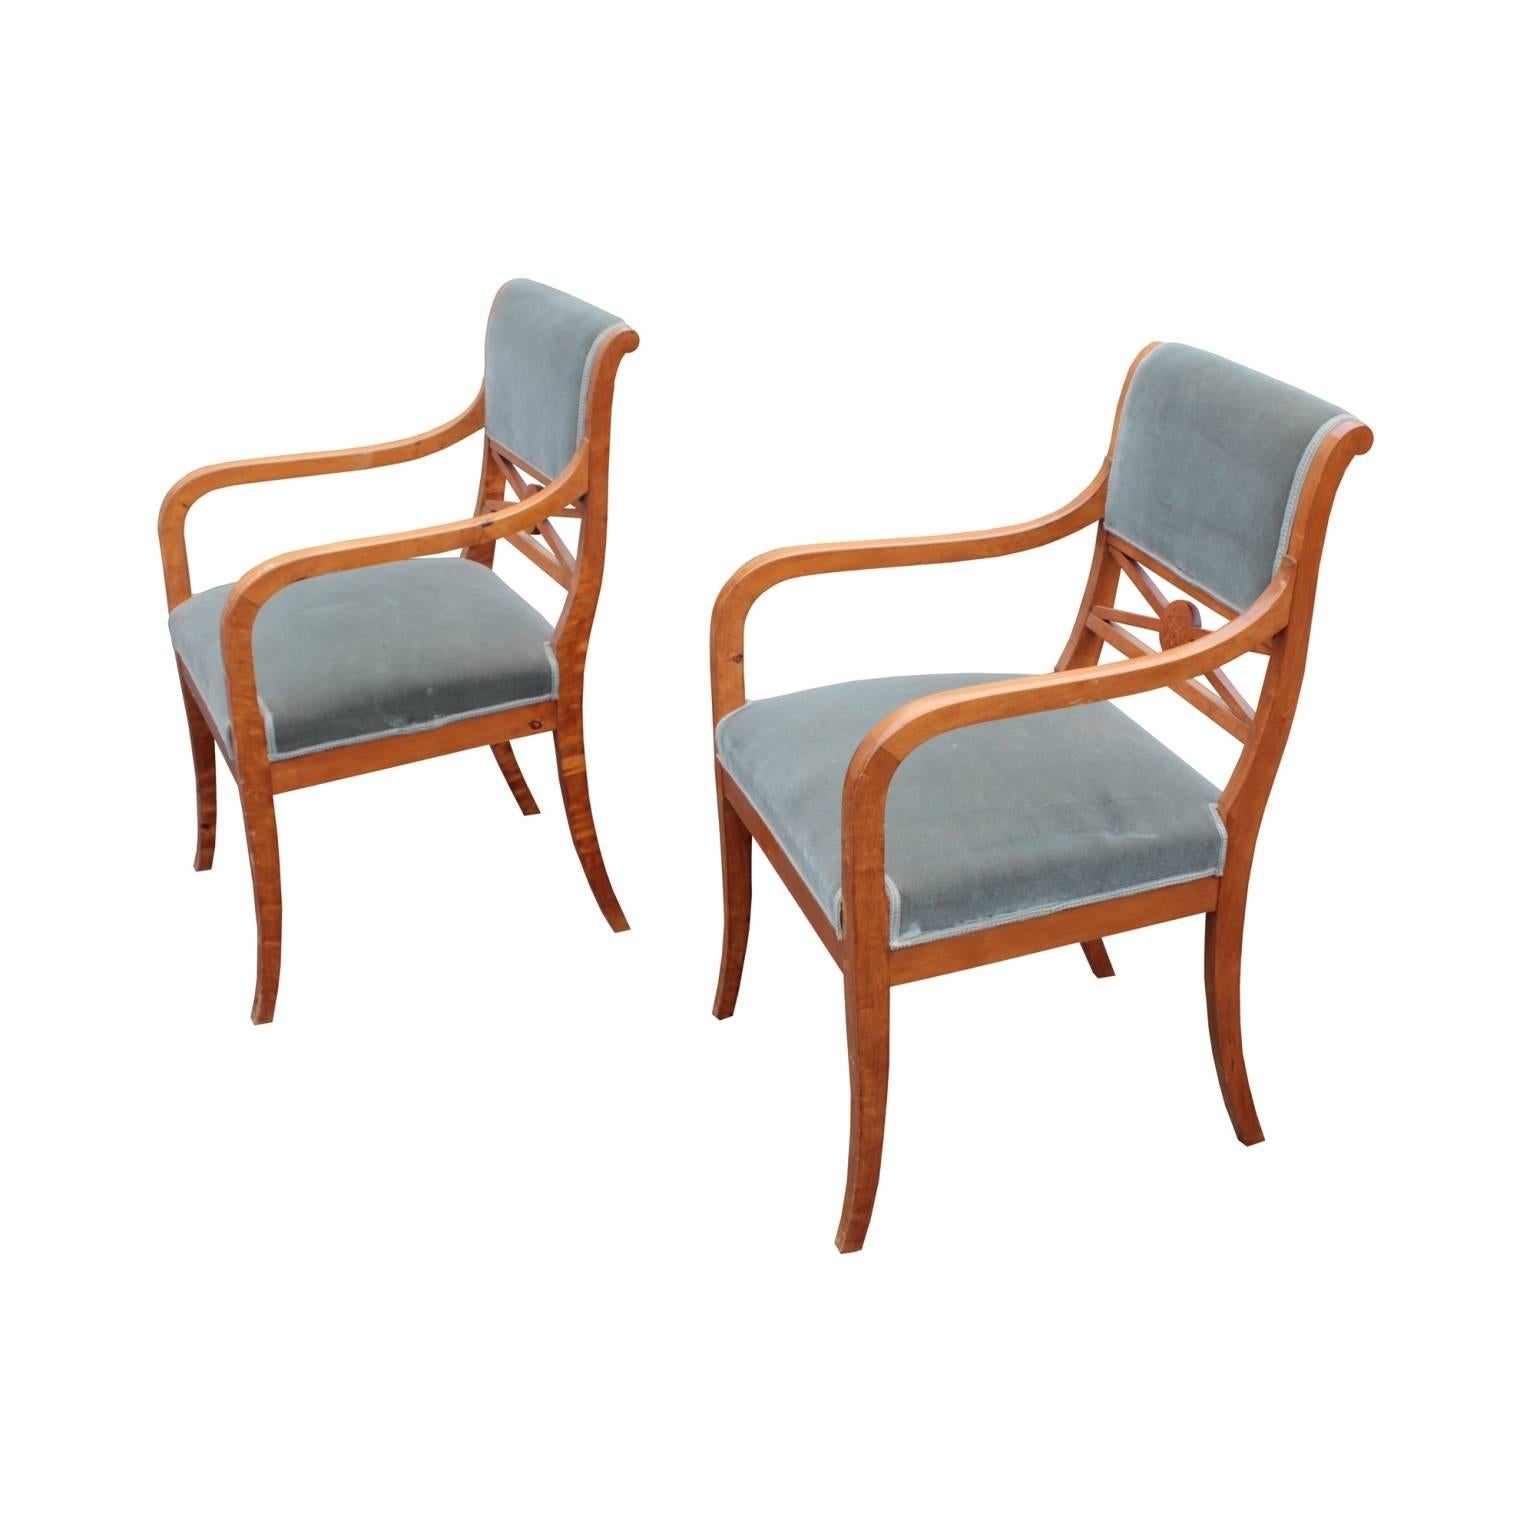 Very elegant Karl Johan (Biedermeier) style flame birch salon seating suite of two arm chairs and two side chairs. Padded seats and back rests having elegantly curving frames with klismos form sabre legs. Back rests with 'X